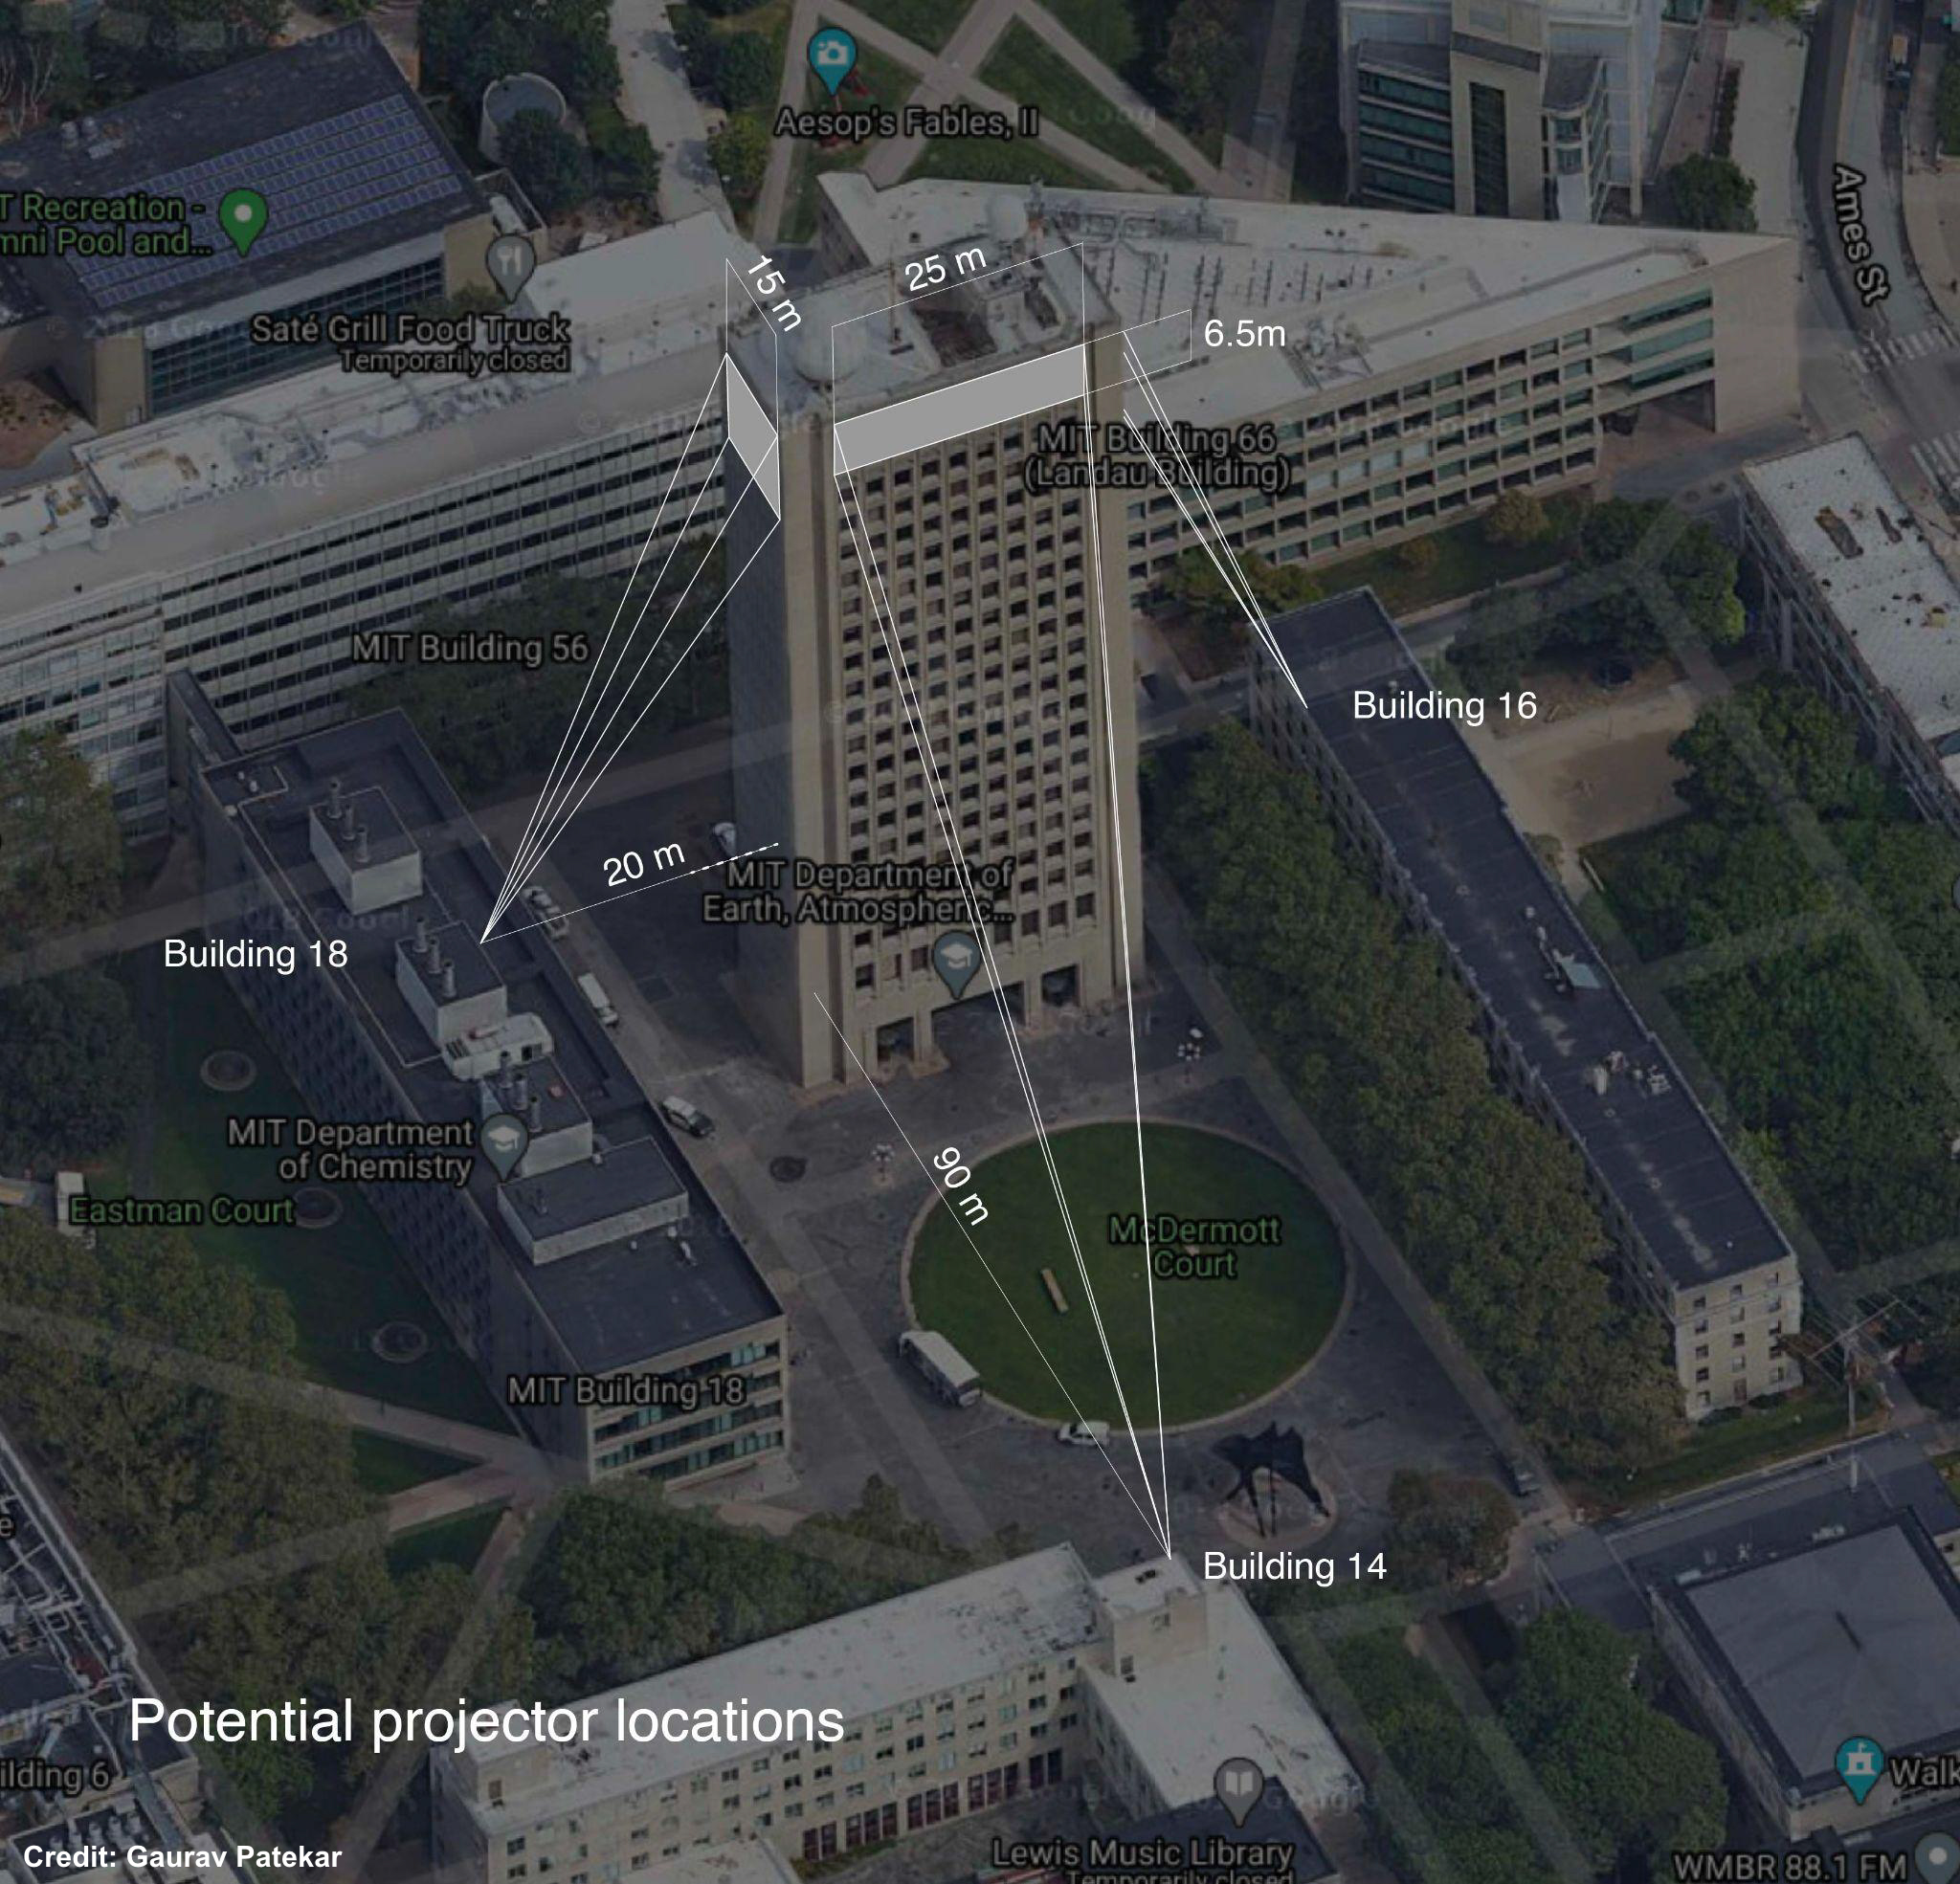 Possible Projection locations around the MIT Green Building